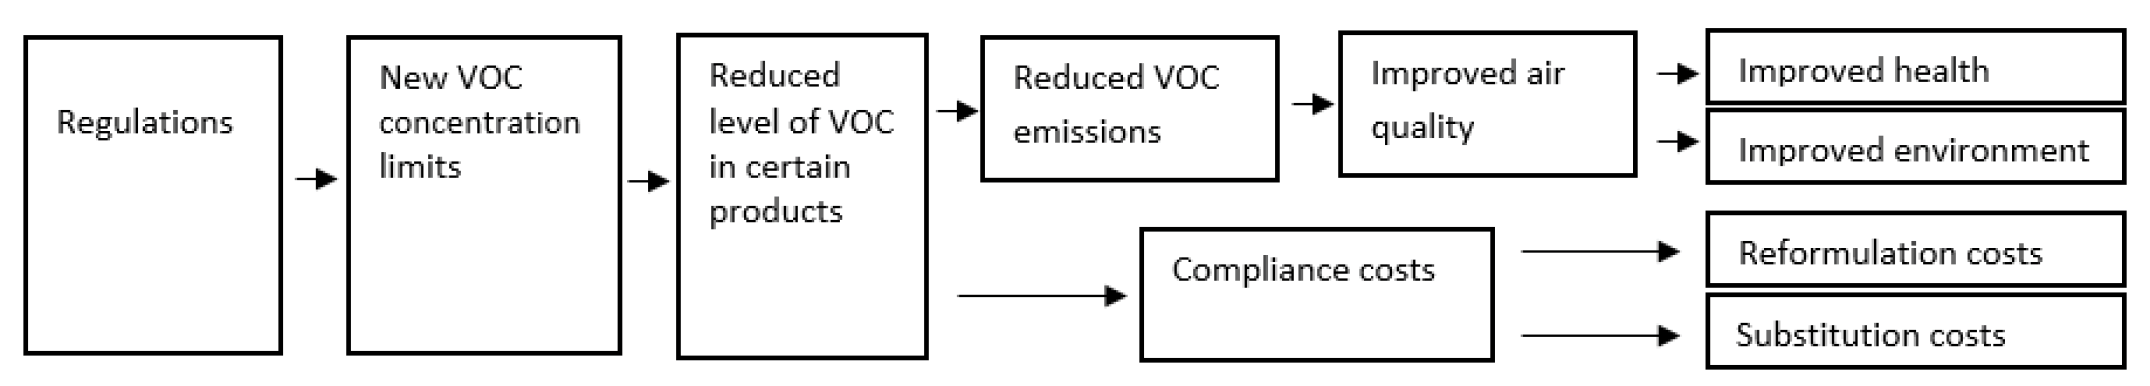 Logic model for the analysis of the Regulations – Text version below the image